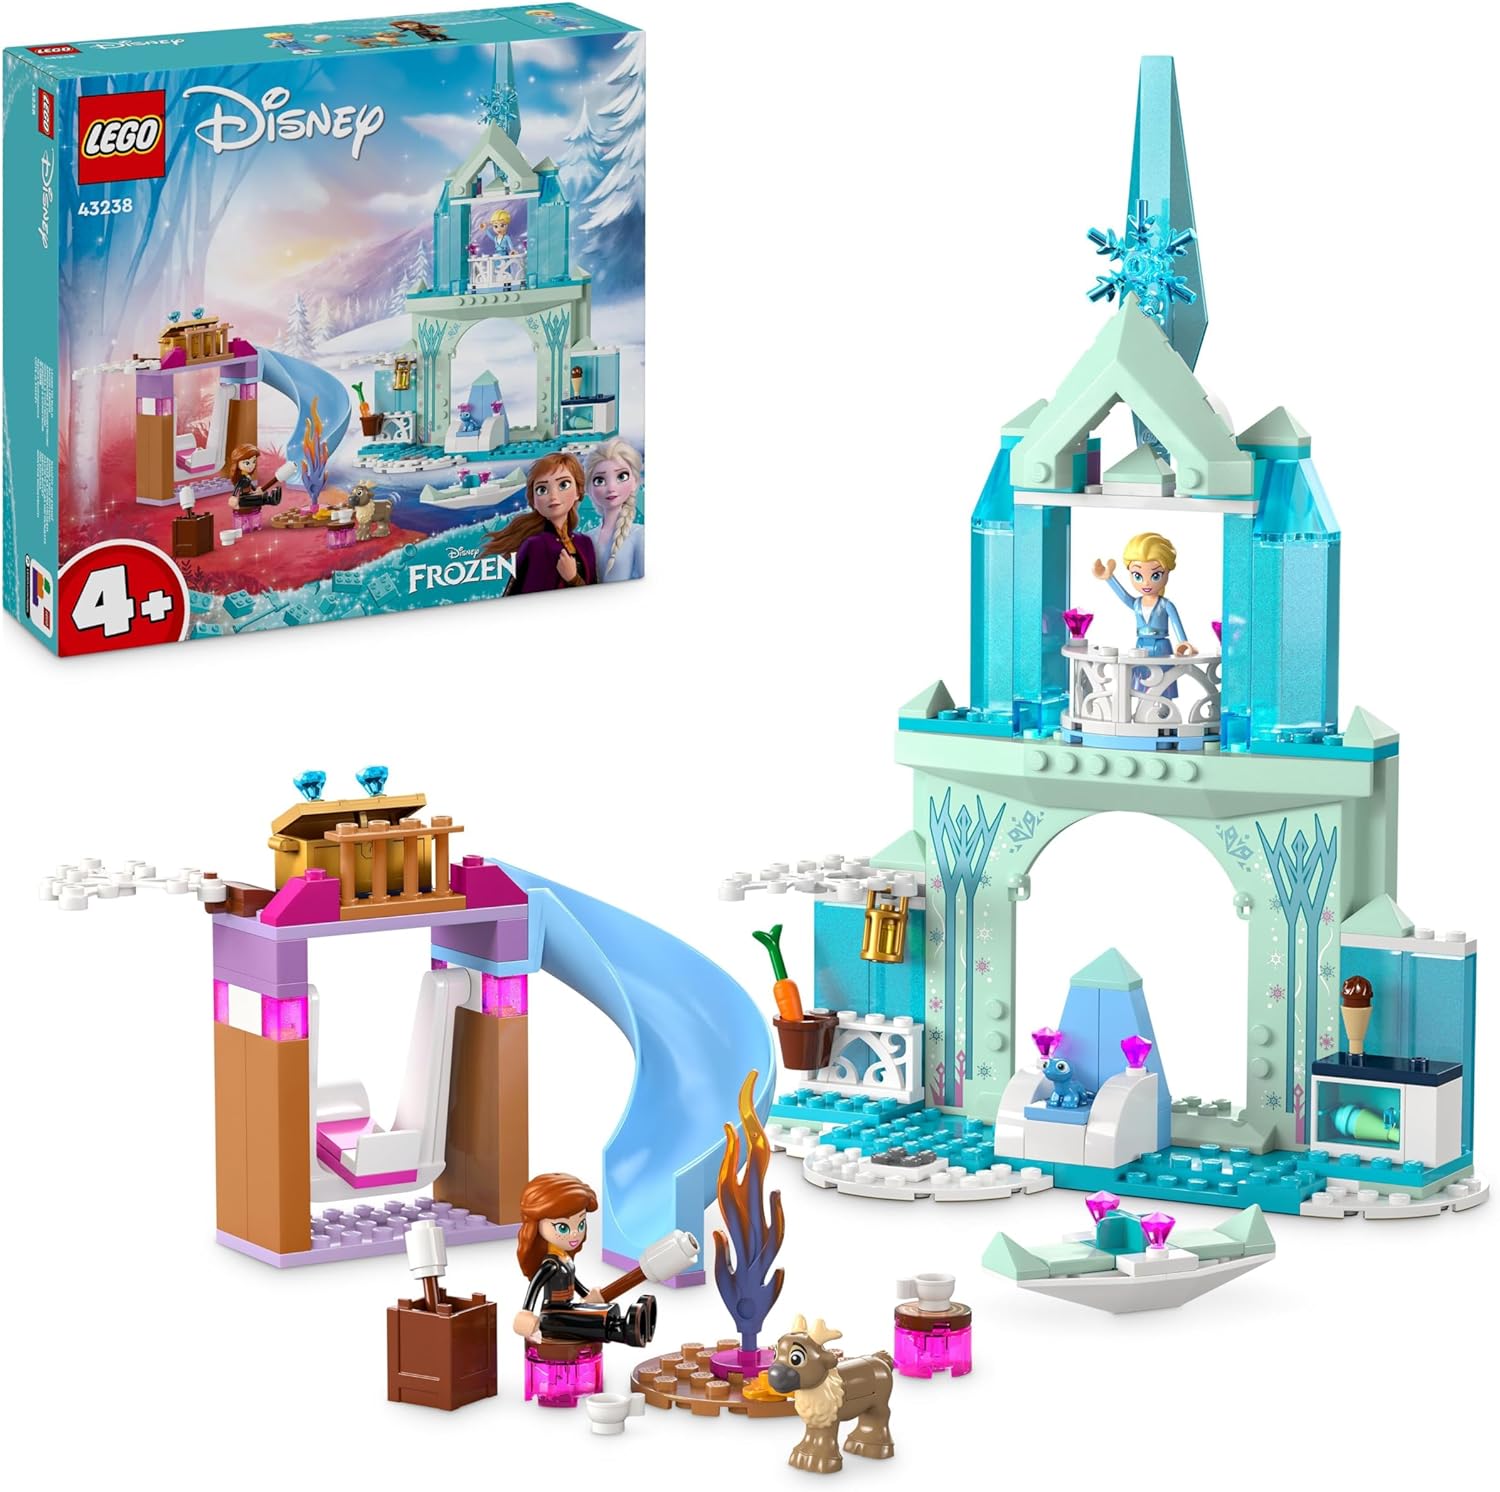 LEGO Disney Frozen Elsa\'s Ice Palace, Frozen Castle Toy with Princess Elsa and Anna Dolls, Plus 2 Animal Figures, Great Gift for 4 Year Old Girls and Boys 43238